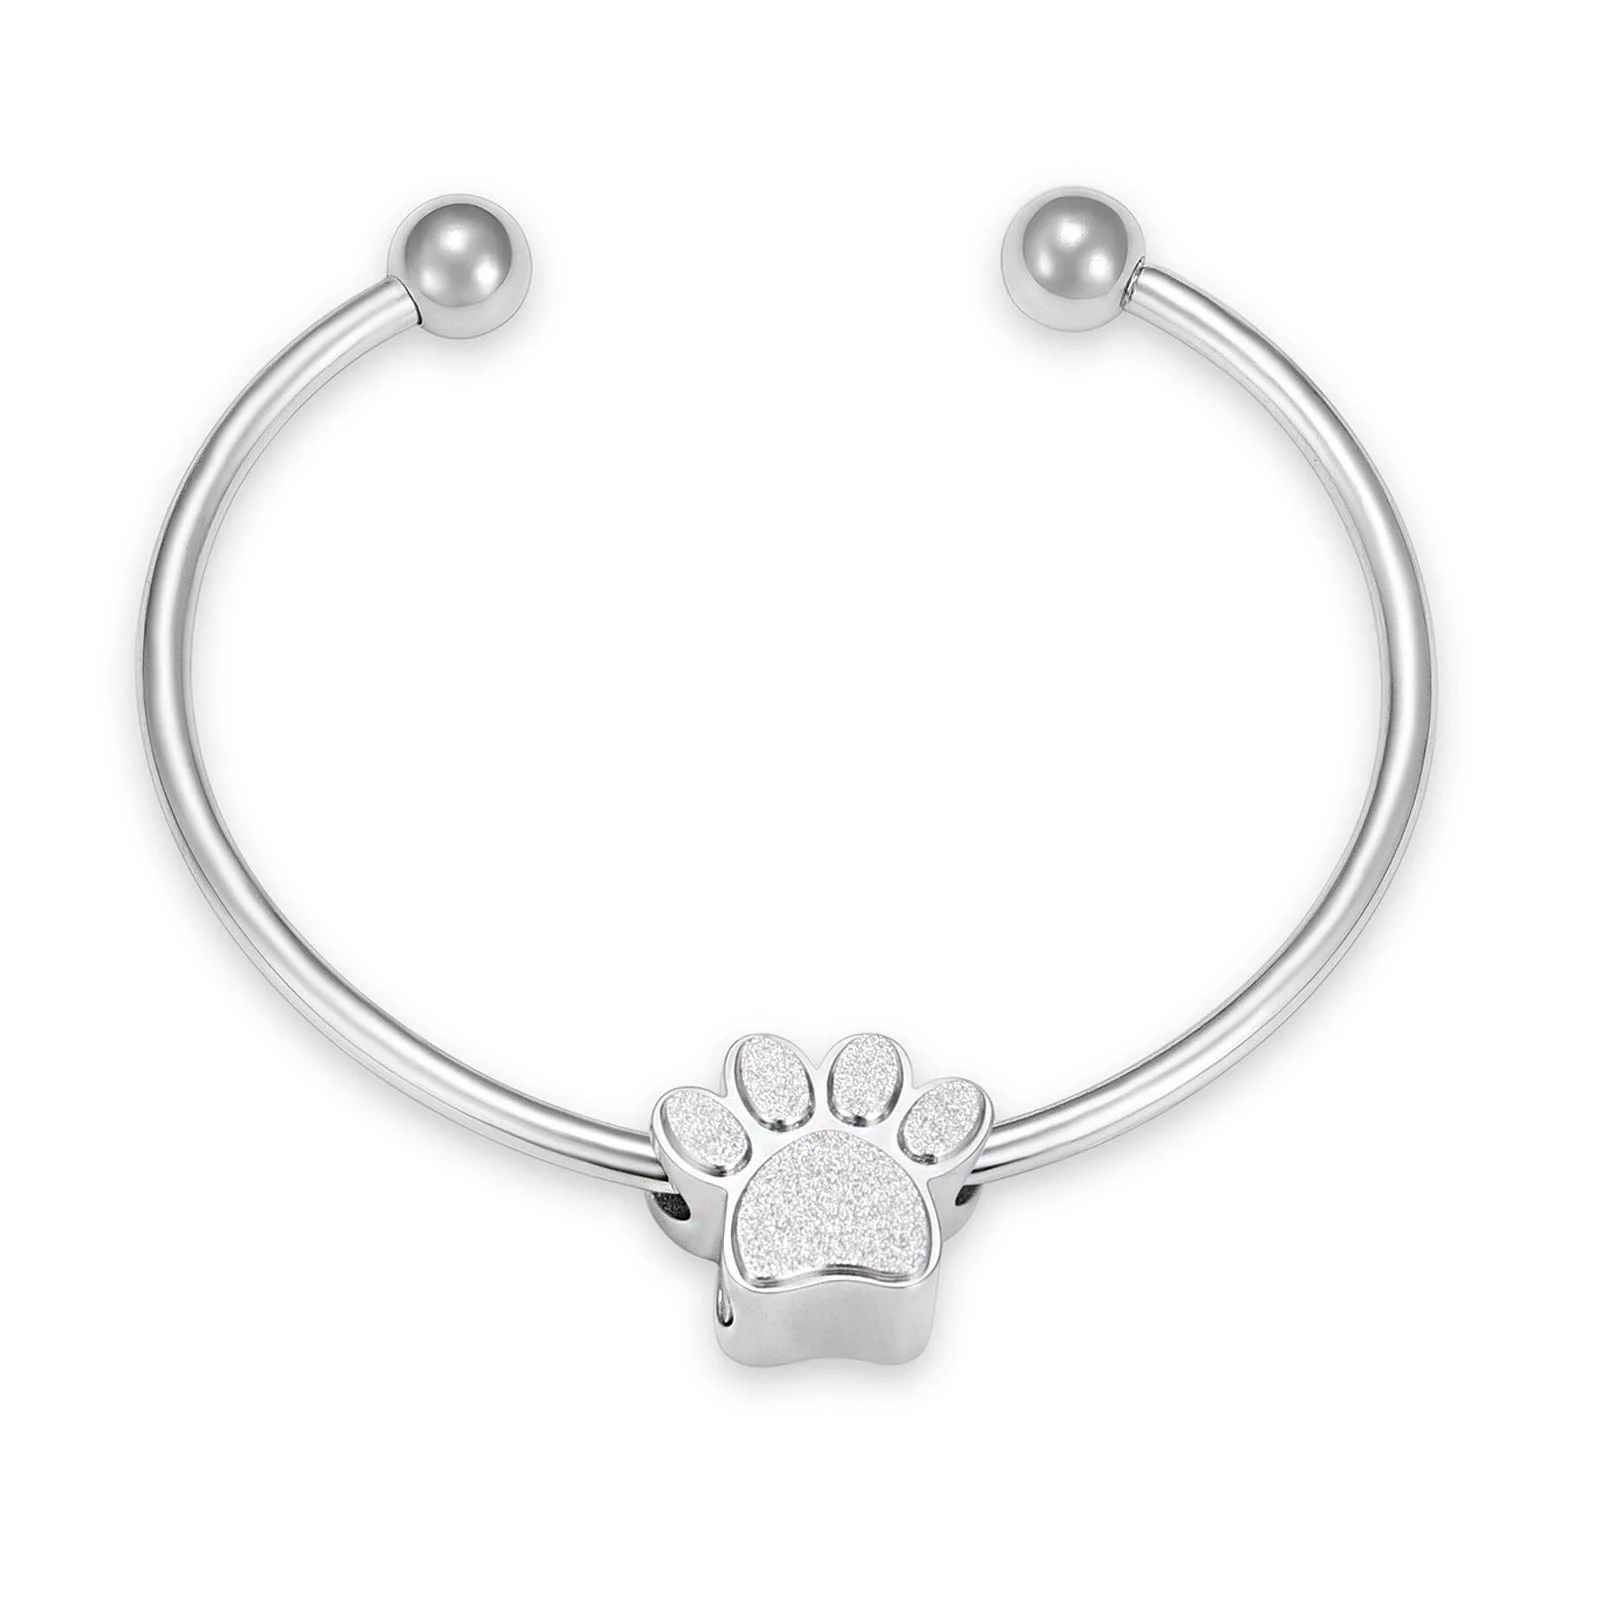 Cremation Urn Bracelet Jewelry for Human Pet Paw Print Ashes Urns Cuff Bangle Bracelets Keepsake Memorial Ash Holder for Wome